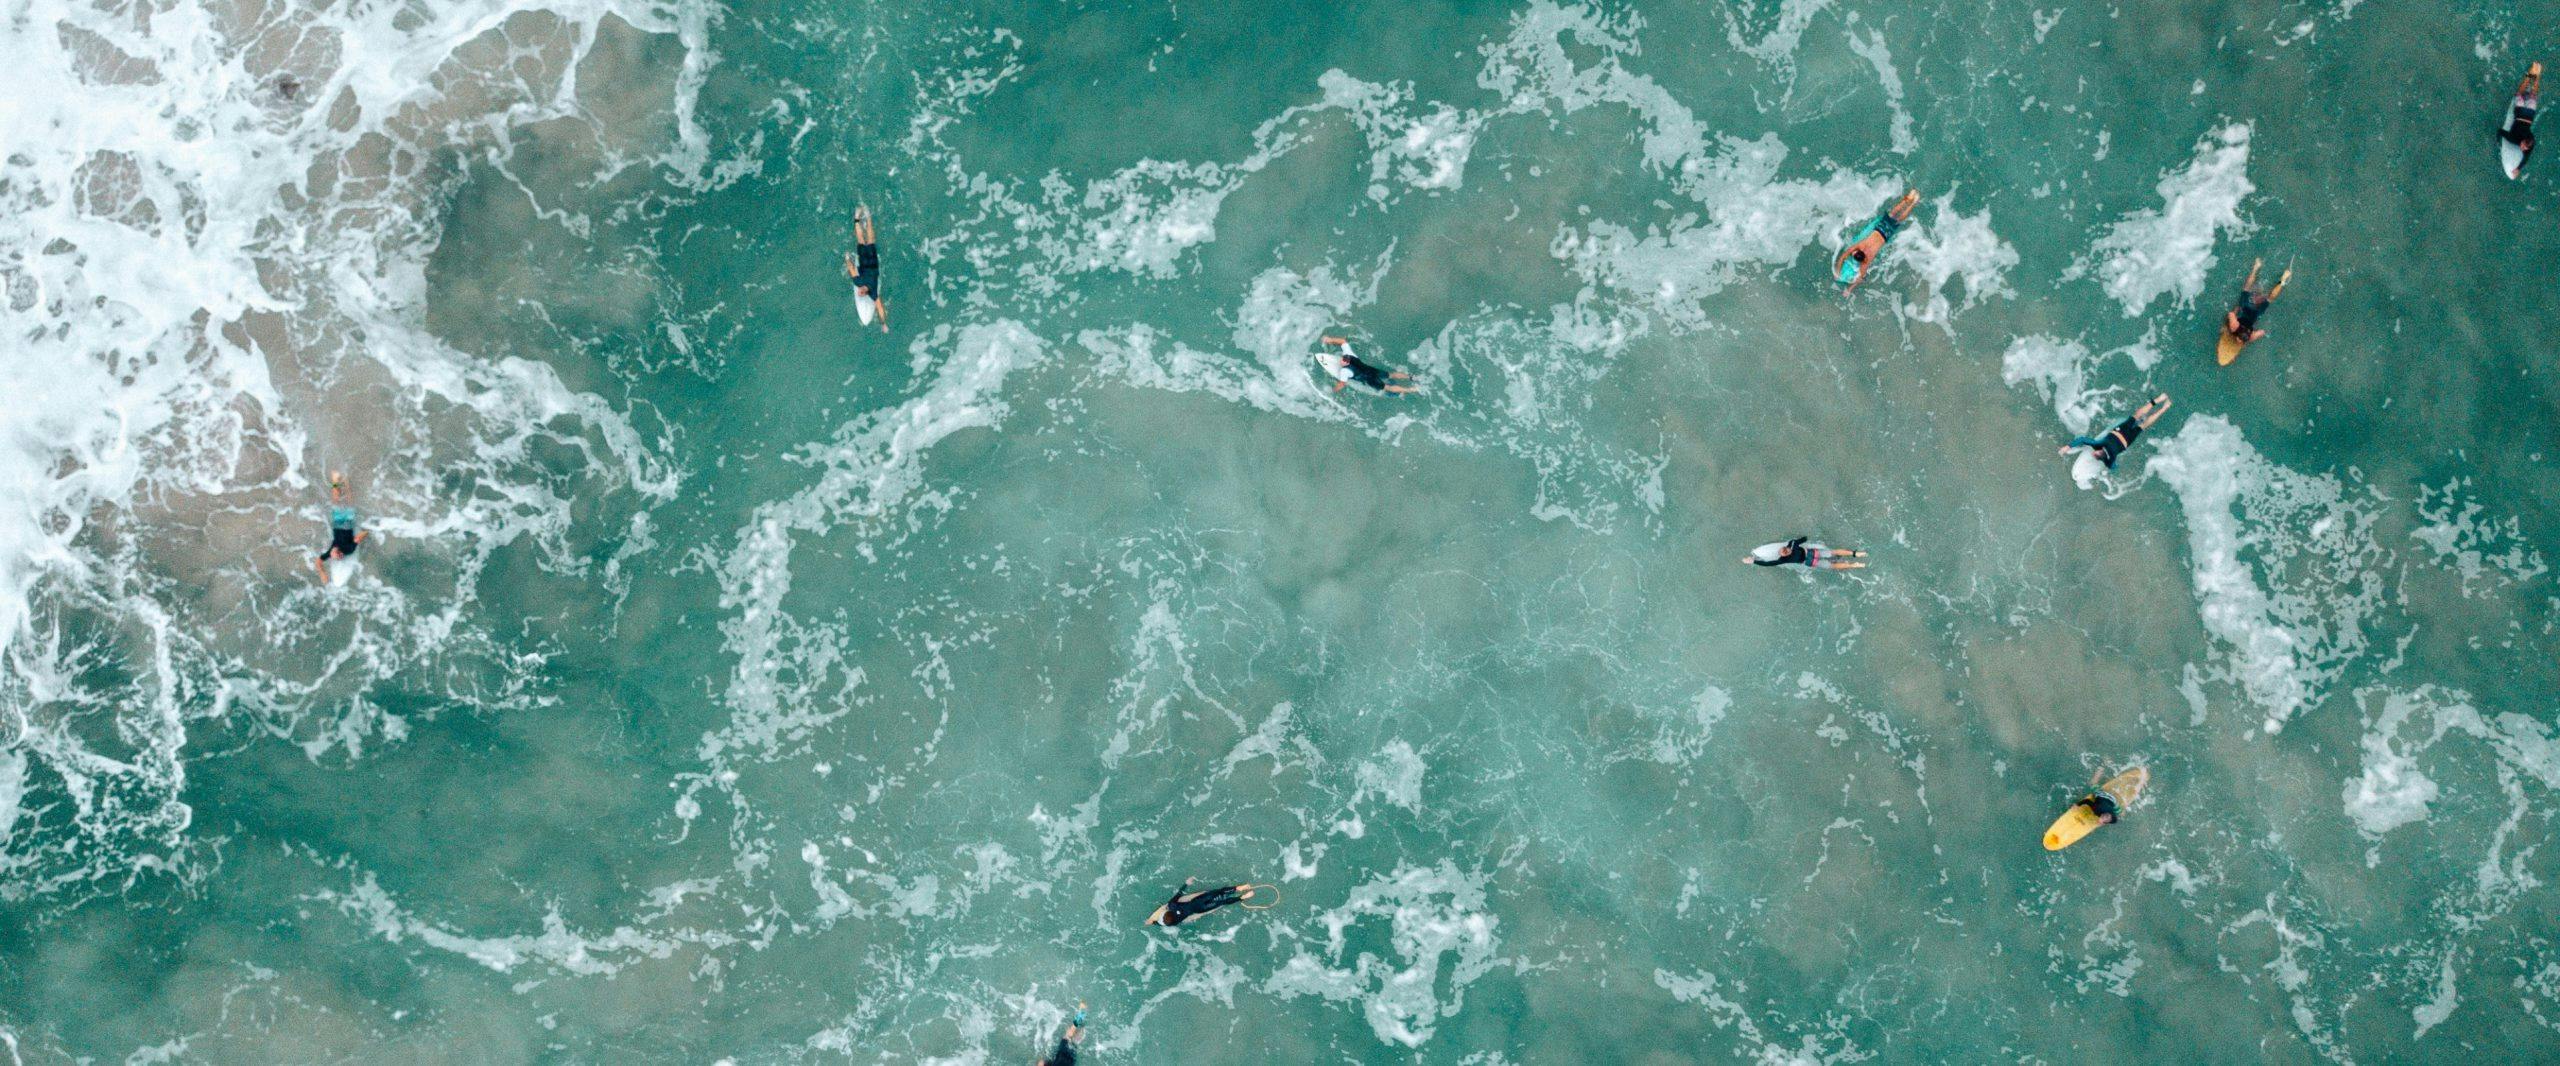 An aerial view of surfers paddling in the water.